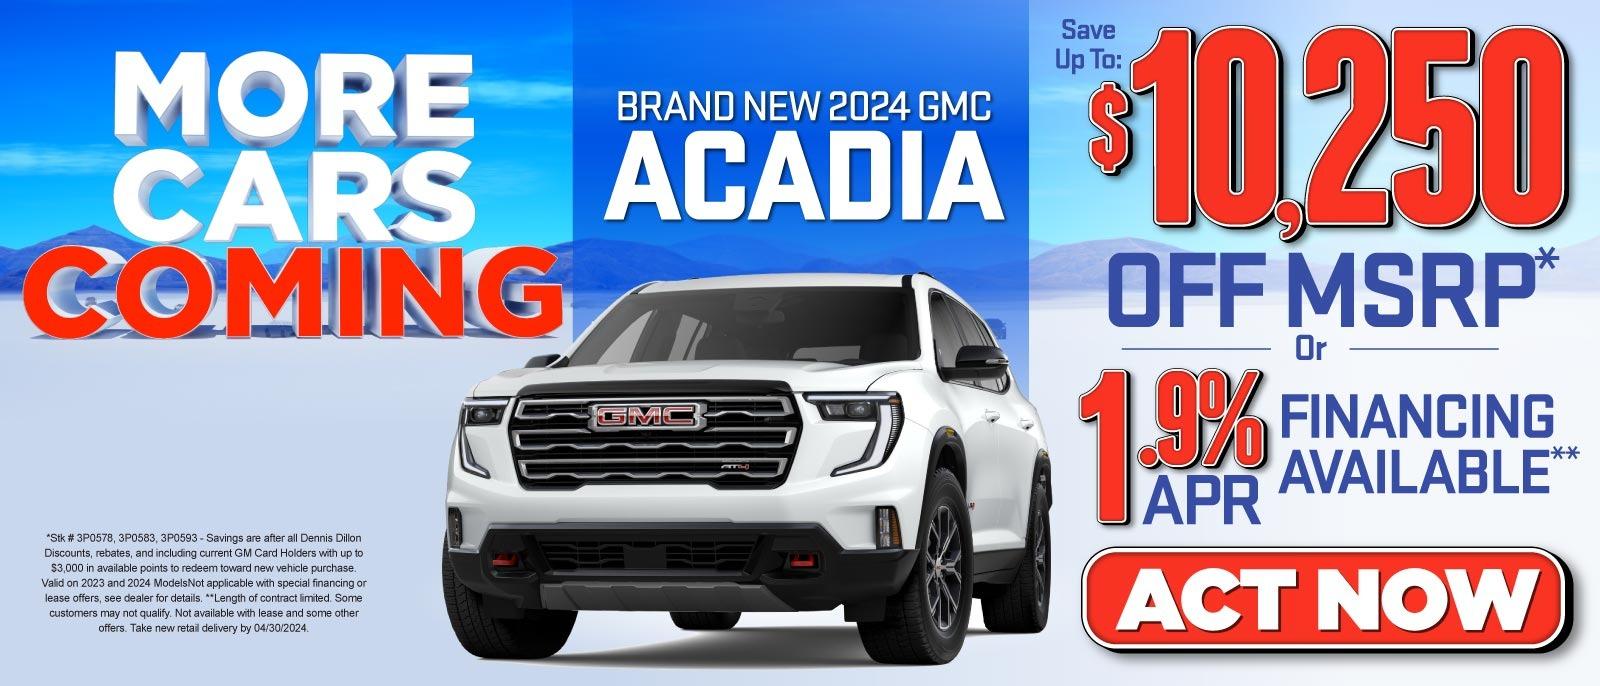 Brand New 2024 GMC Acadia - Save Up To: $10,250 Off MSRP* Or 1.9% APR Financing Available** — Act Now